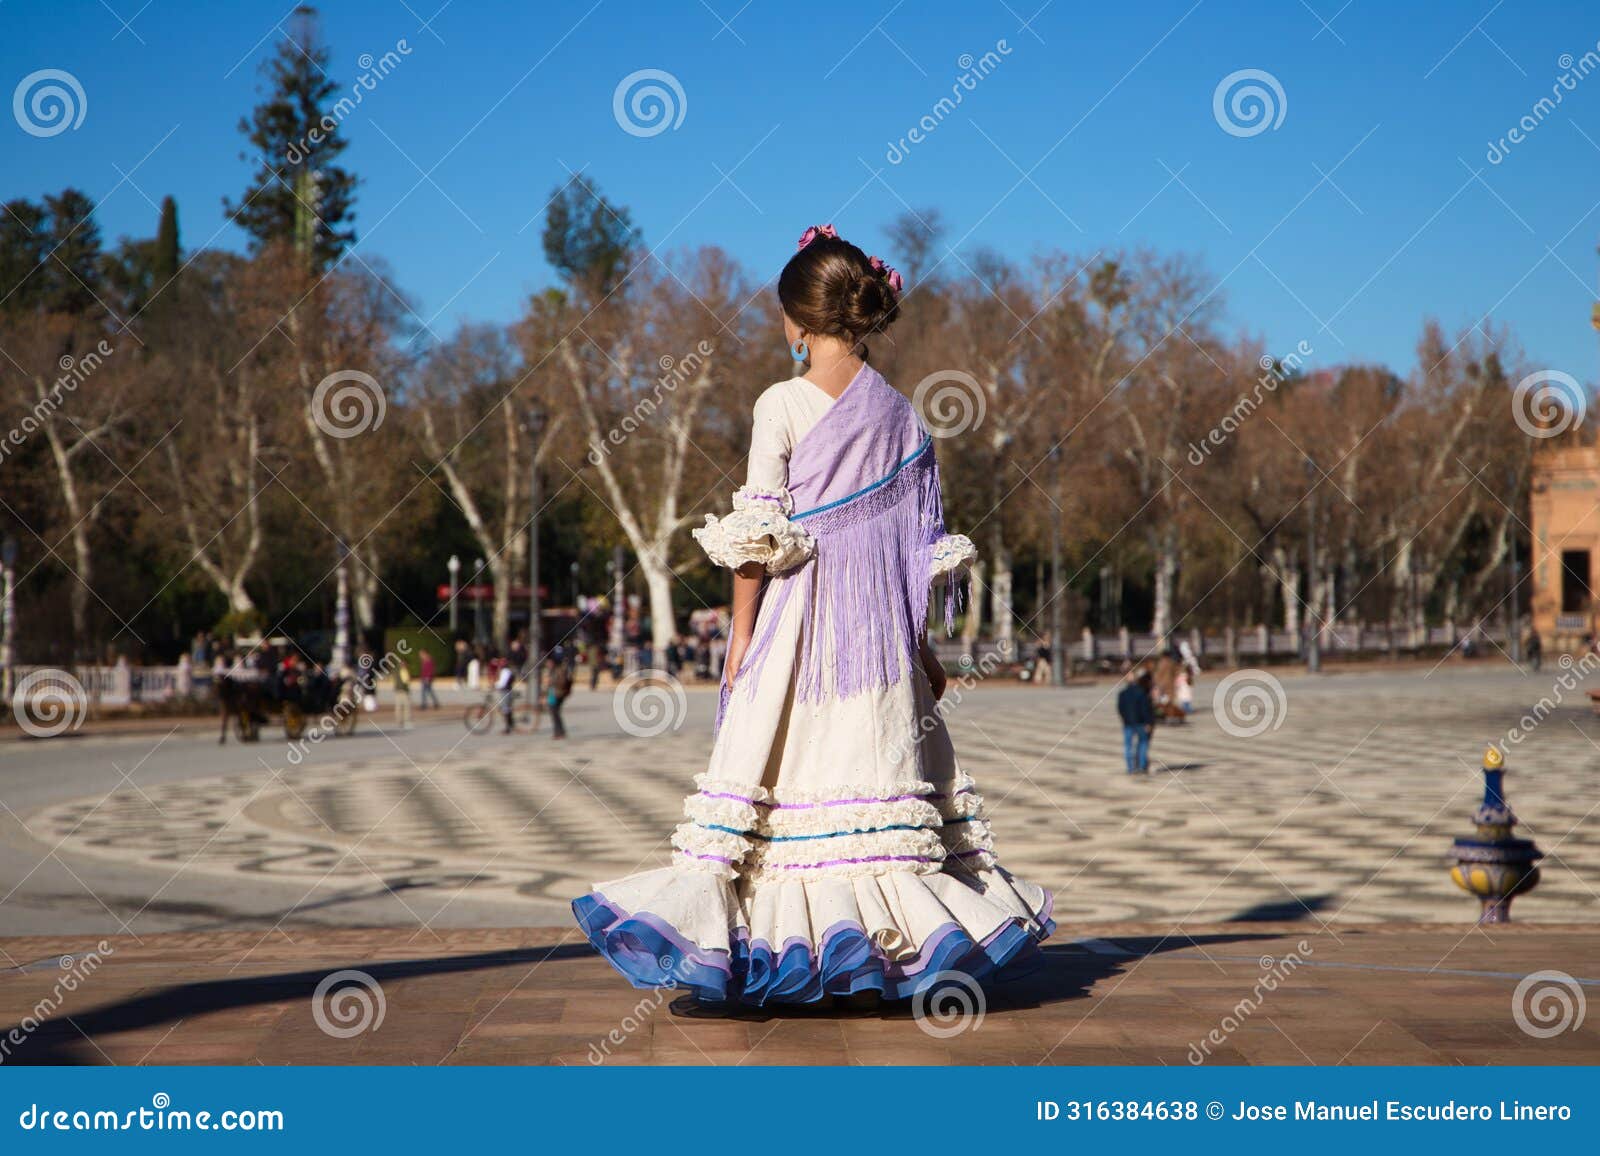 a little girl dancing flamenco dressed in a beige dress with ruffles and purple fringes in a famous square in seville, spain. the